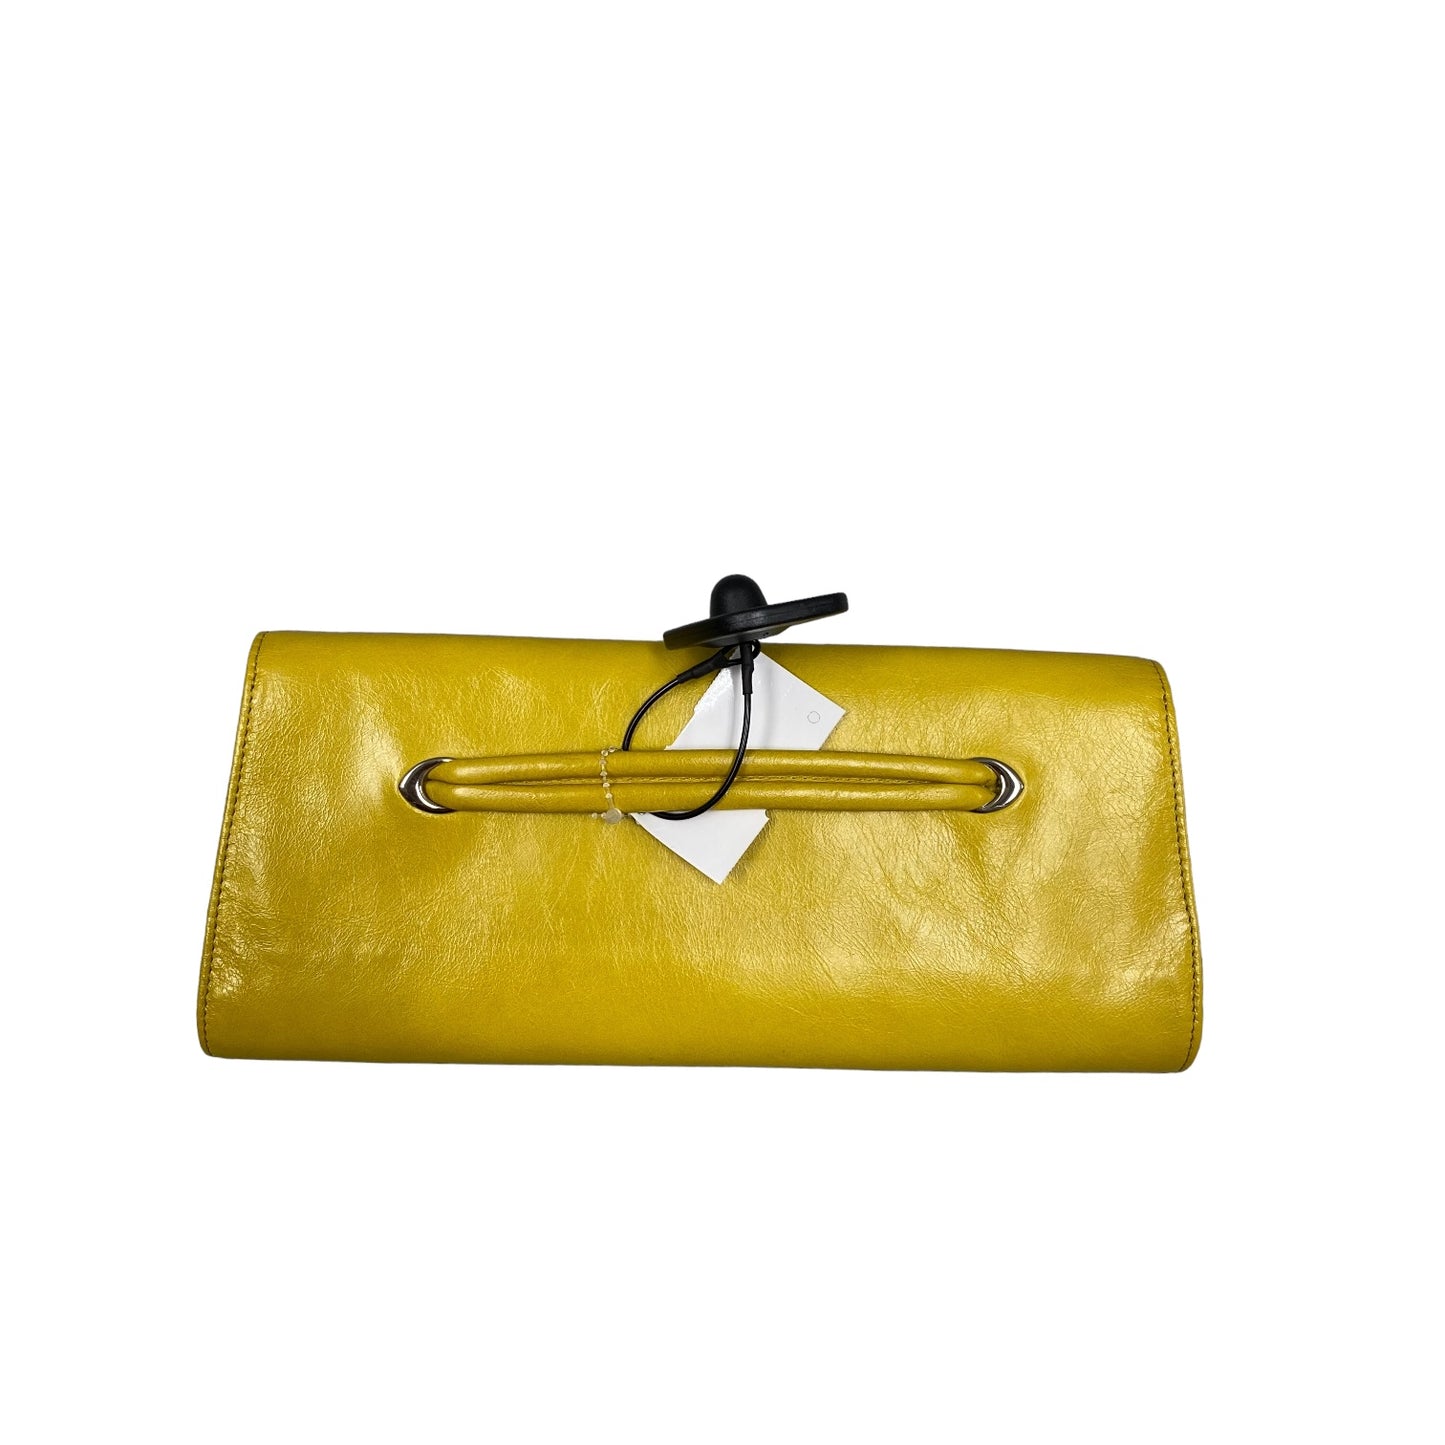 Clutch Leather By Hobo Intl  Size: Medium